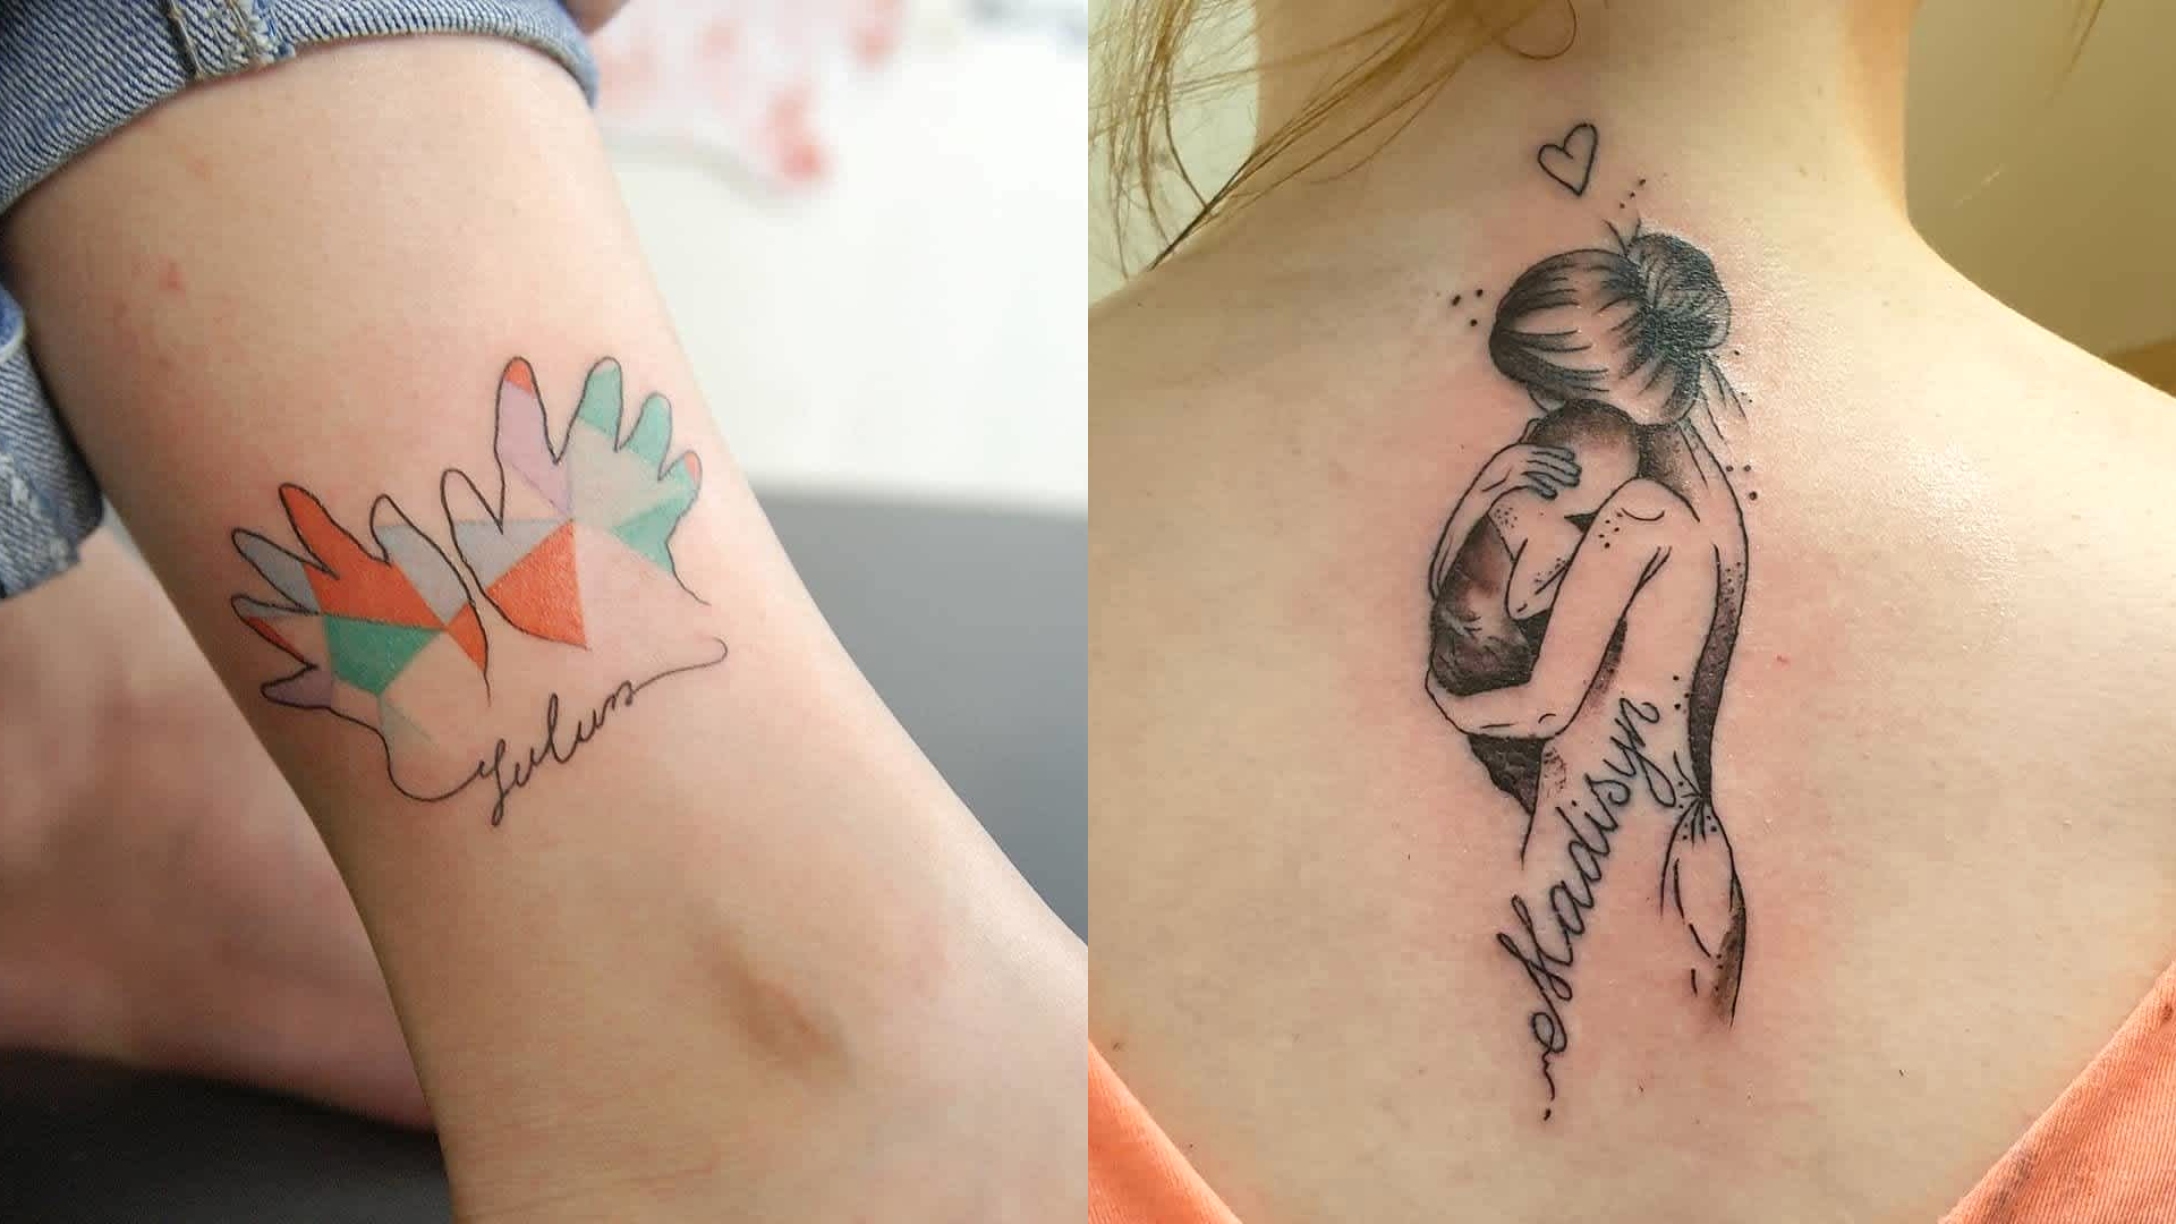 15 Miscarriage Tattoo Ideas to Remember Forever - Motherly